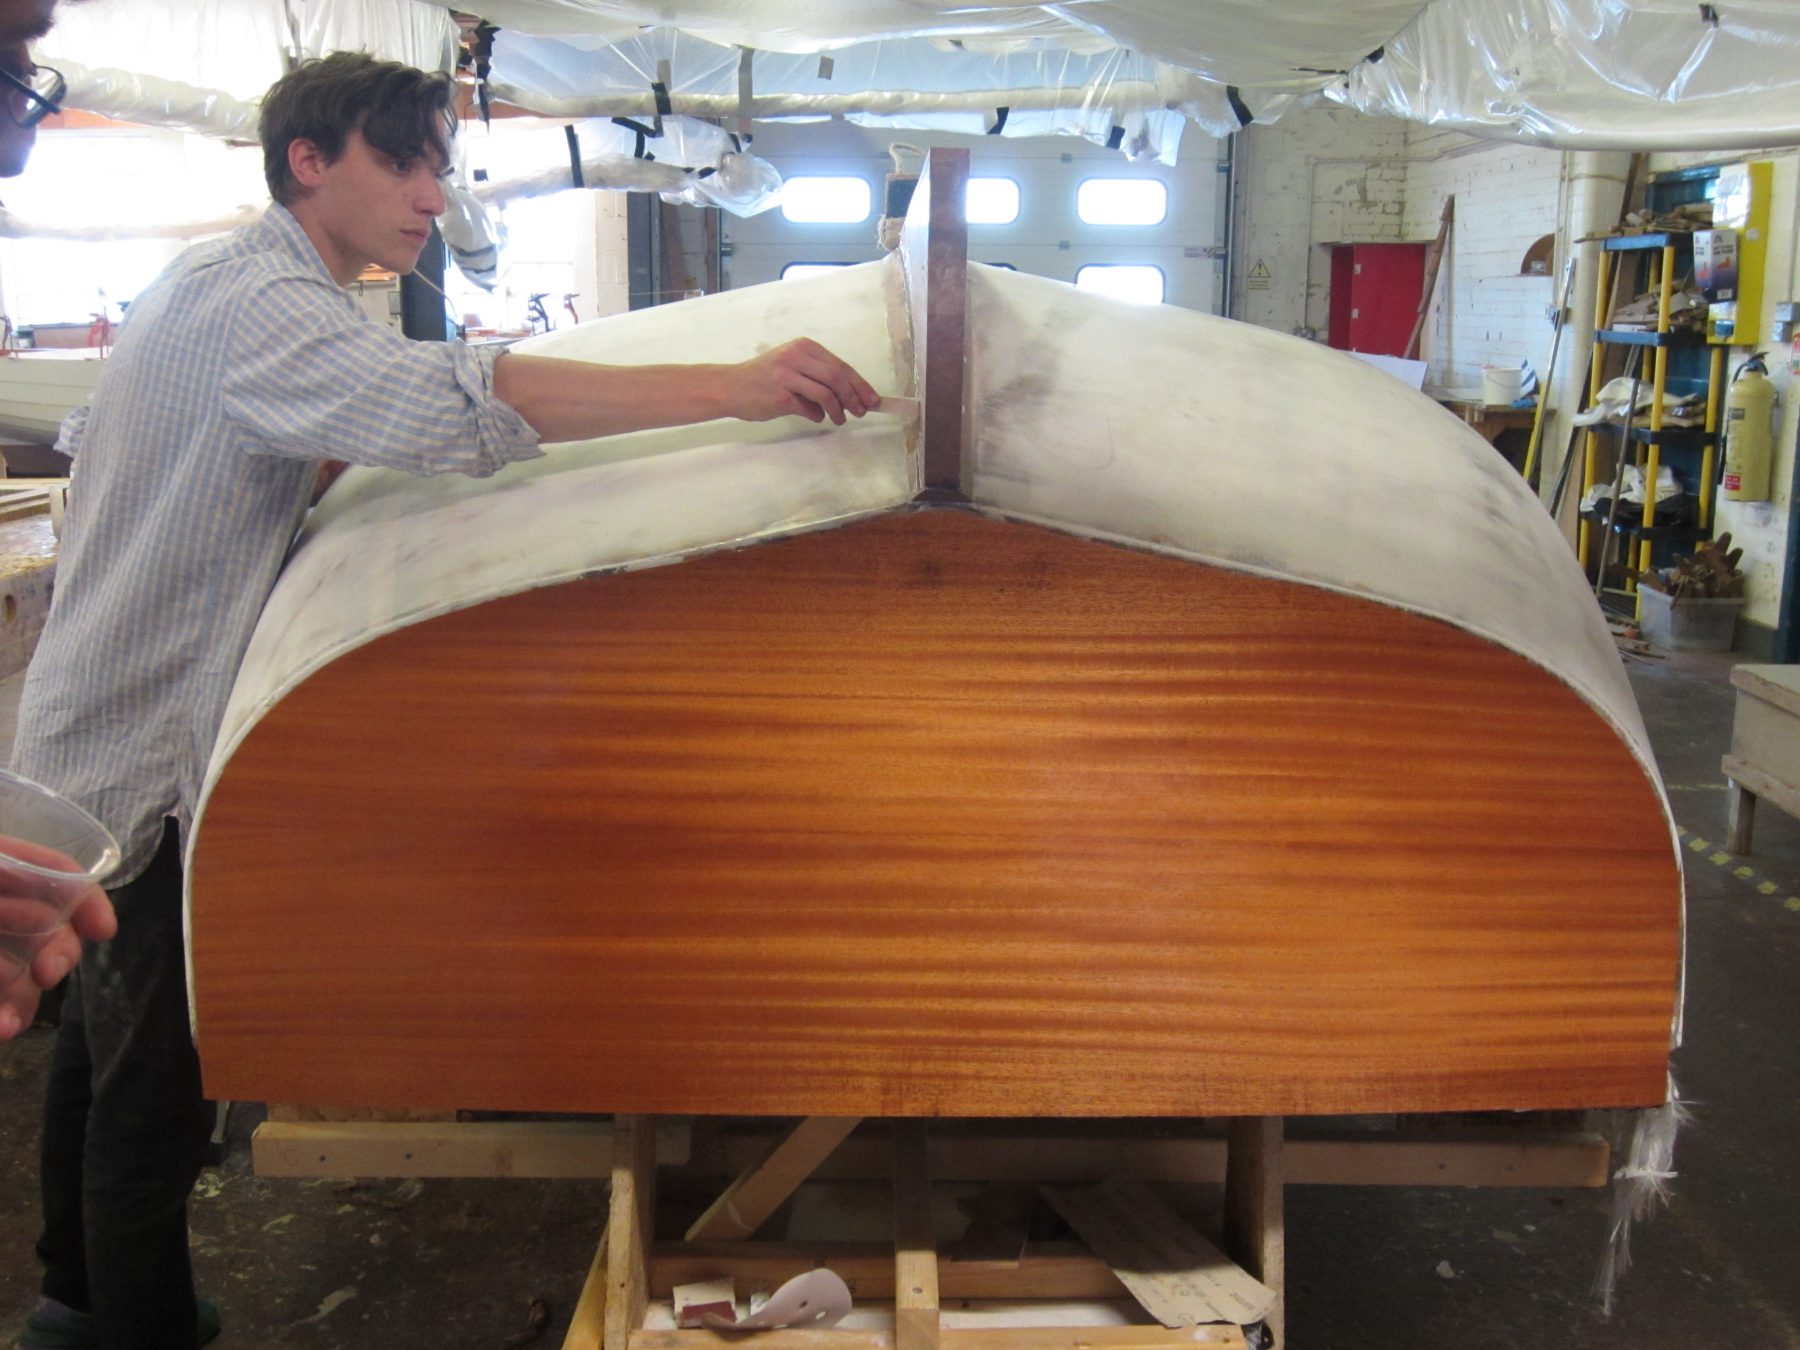 Using epoxy to build the perfect boat — by Sam Collins